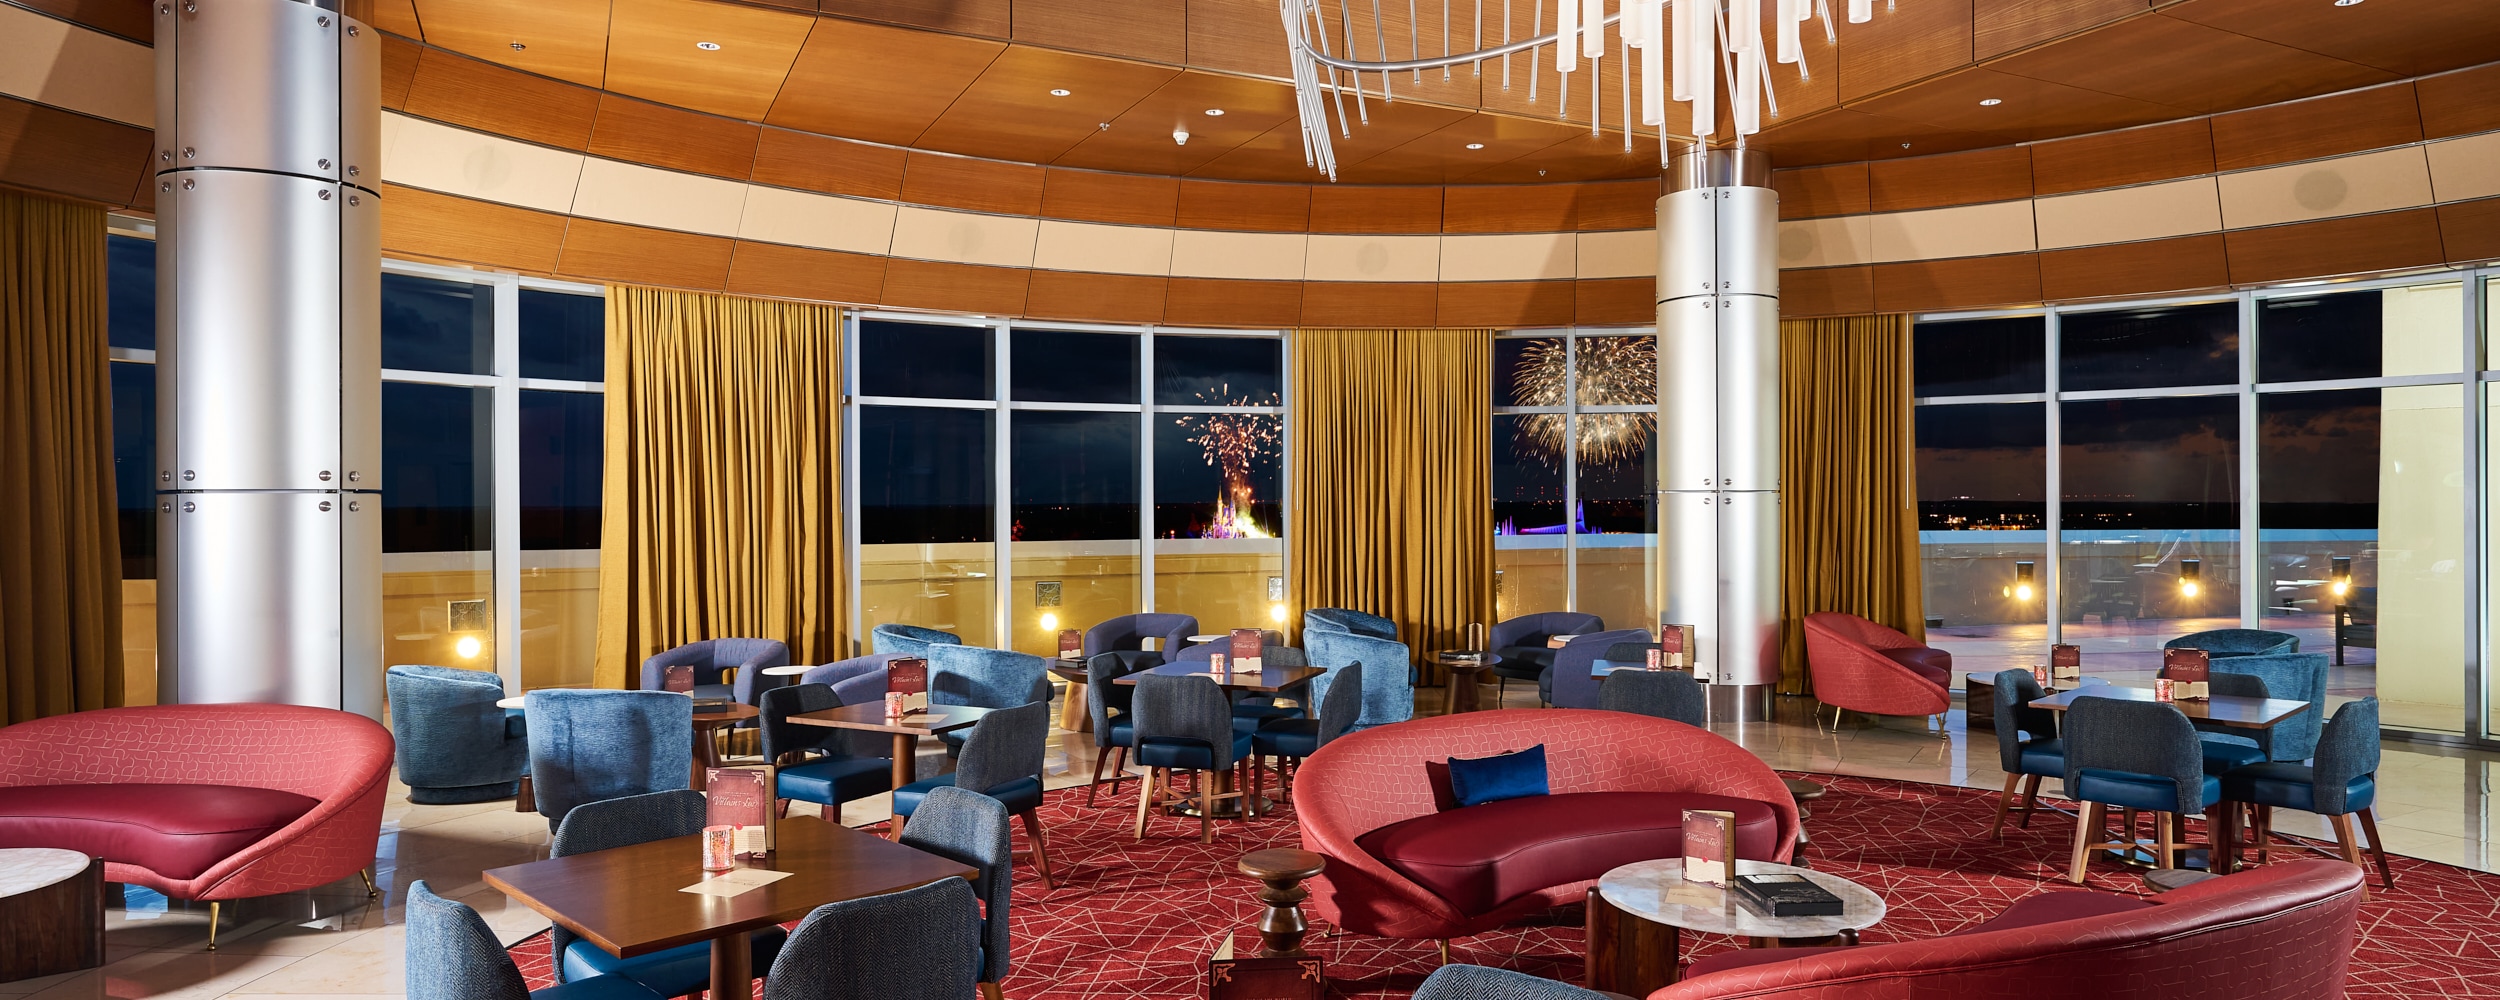 Top Of The World Lounge Disney Vacation Club